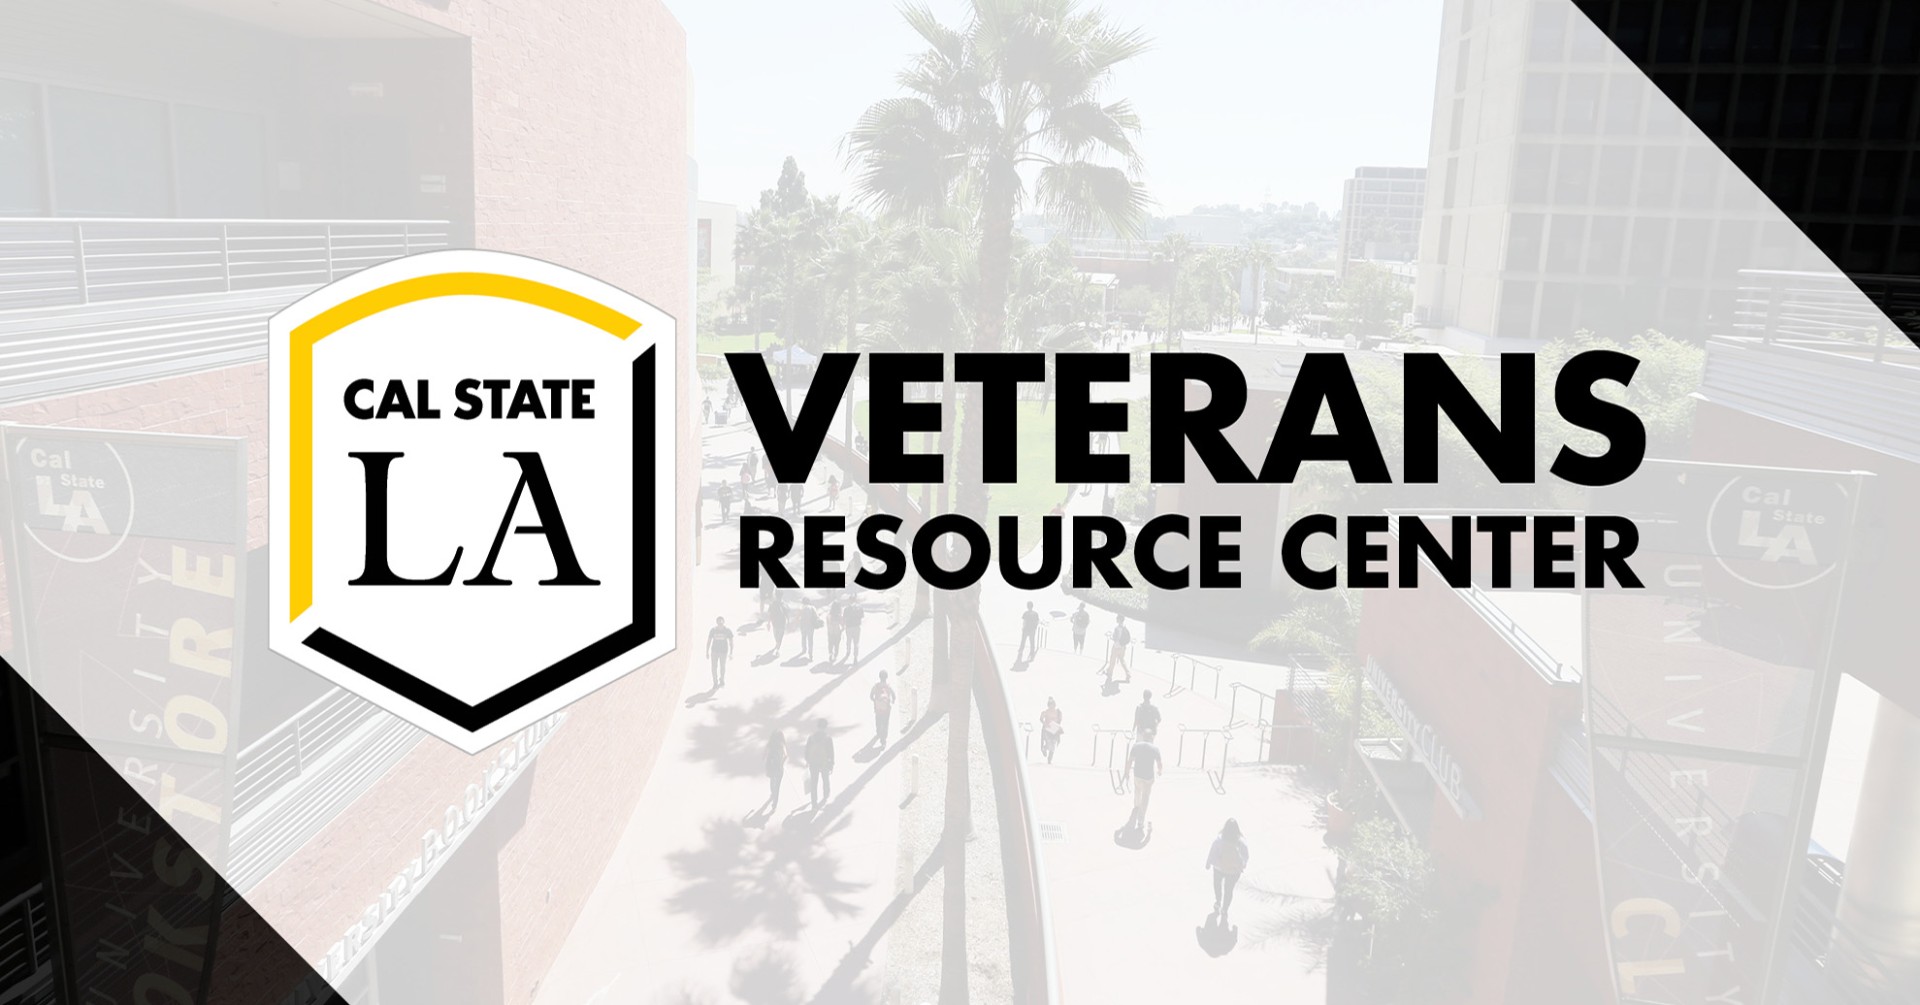 In the foreground Cal State LA Veterans Resource Center. In the background a view of the campus.